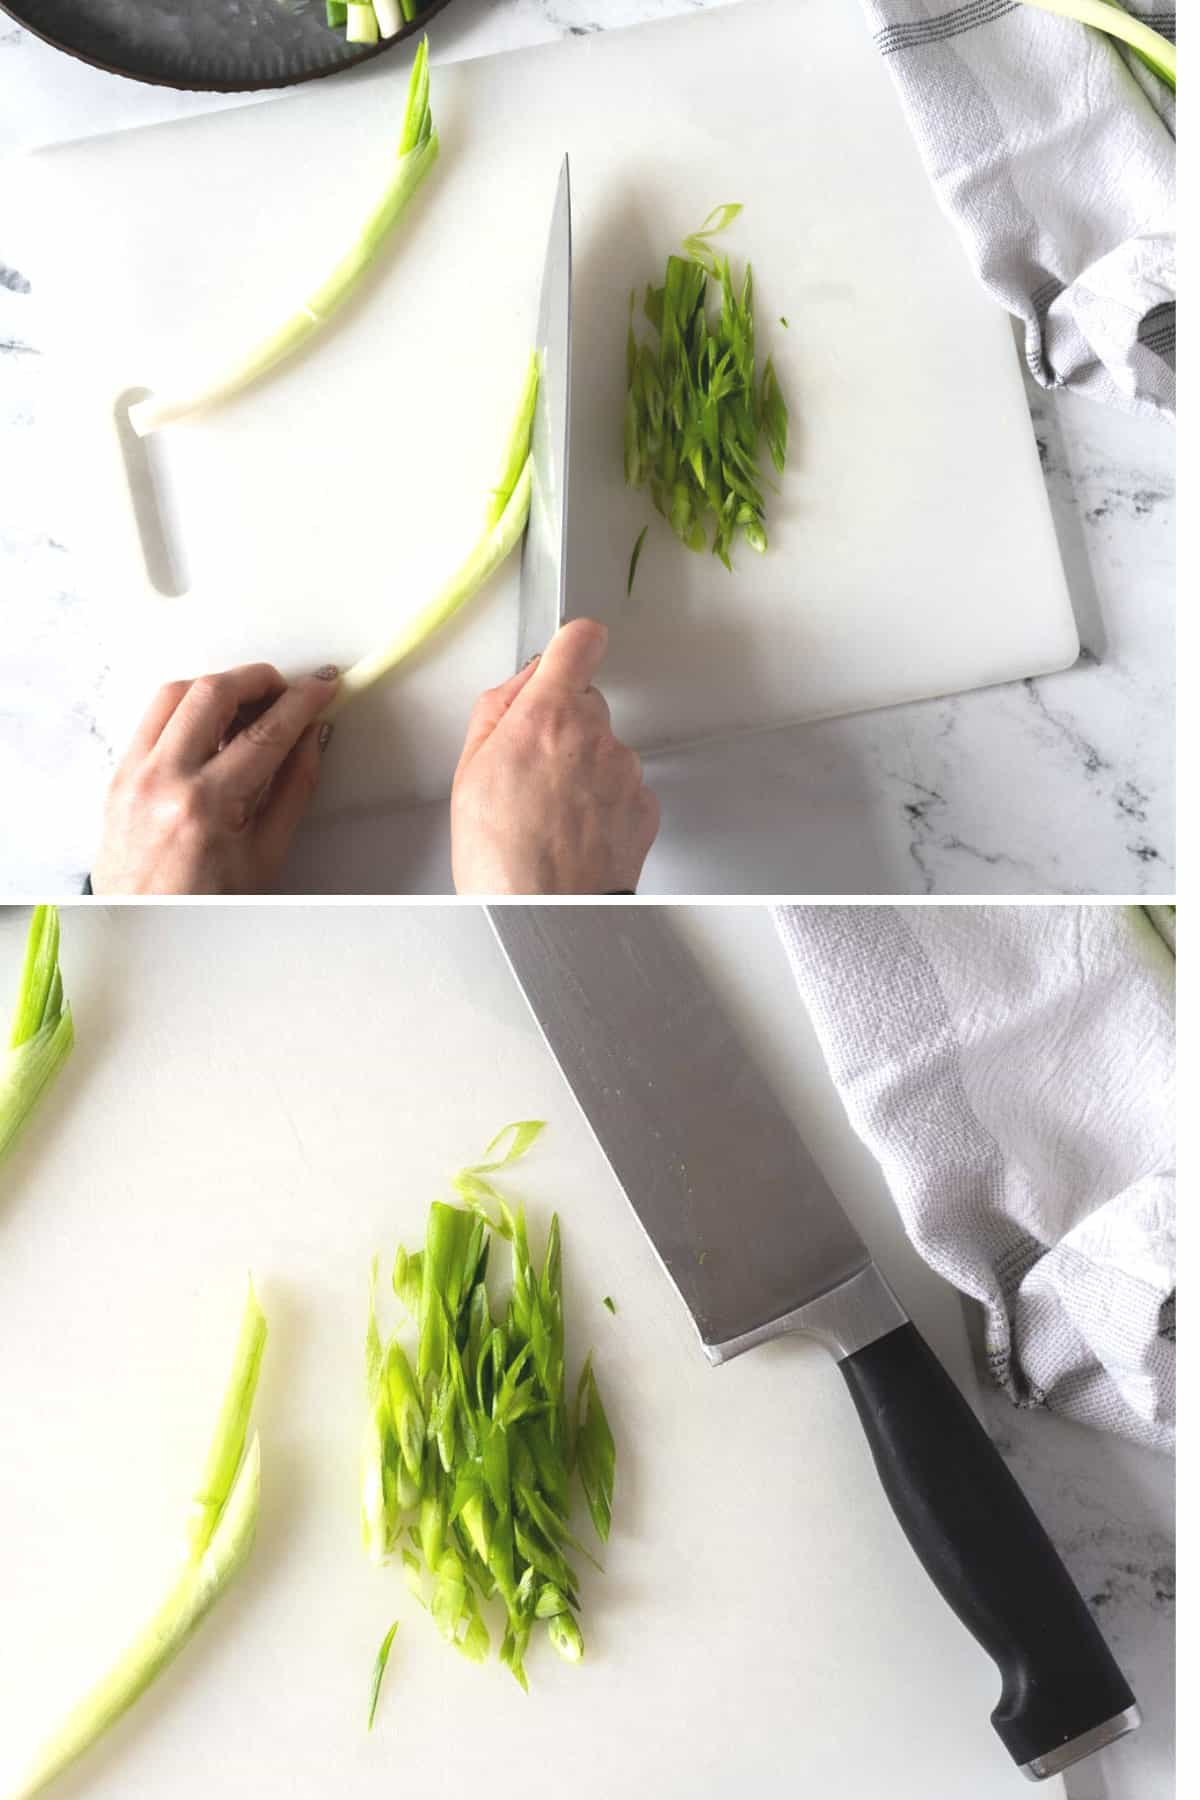 How To Cut Green Onions - Running to the Kitchen®